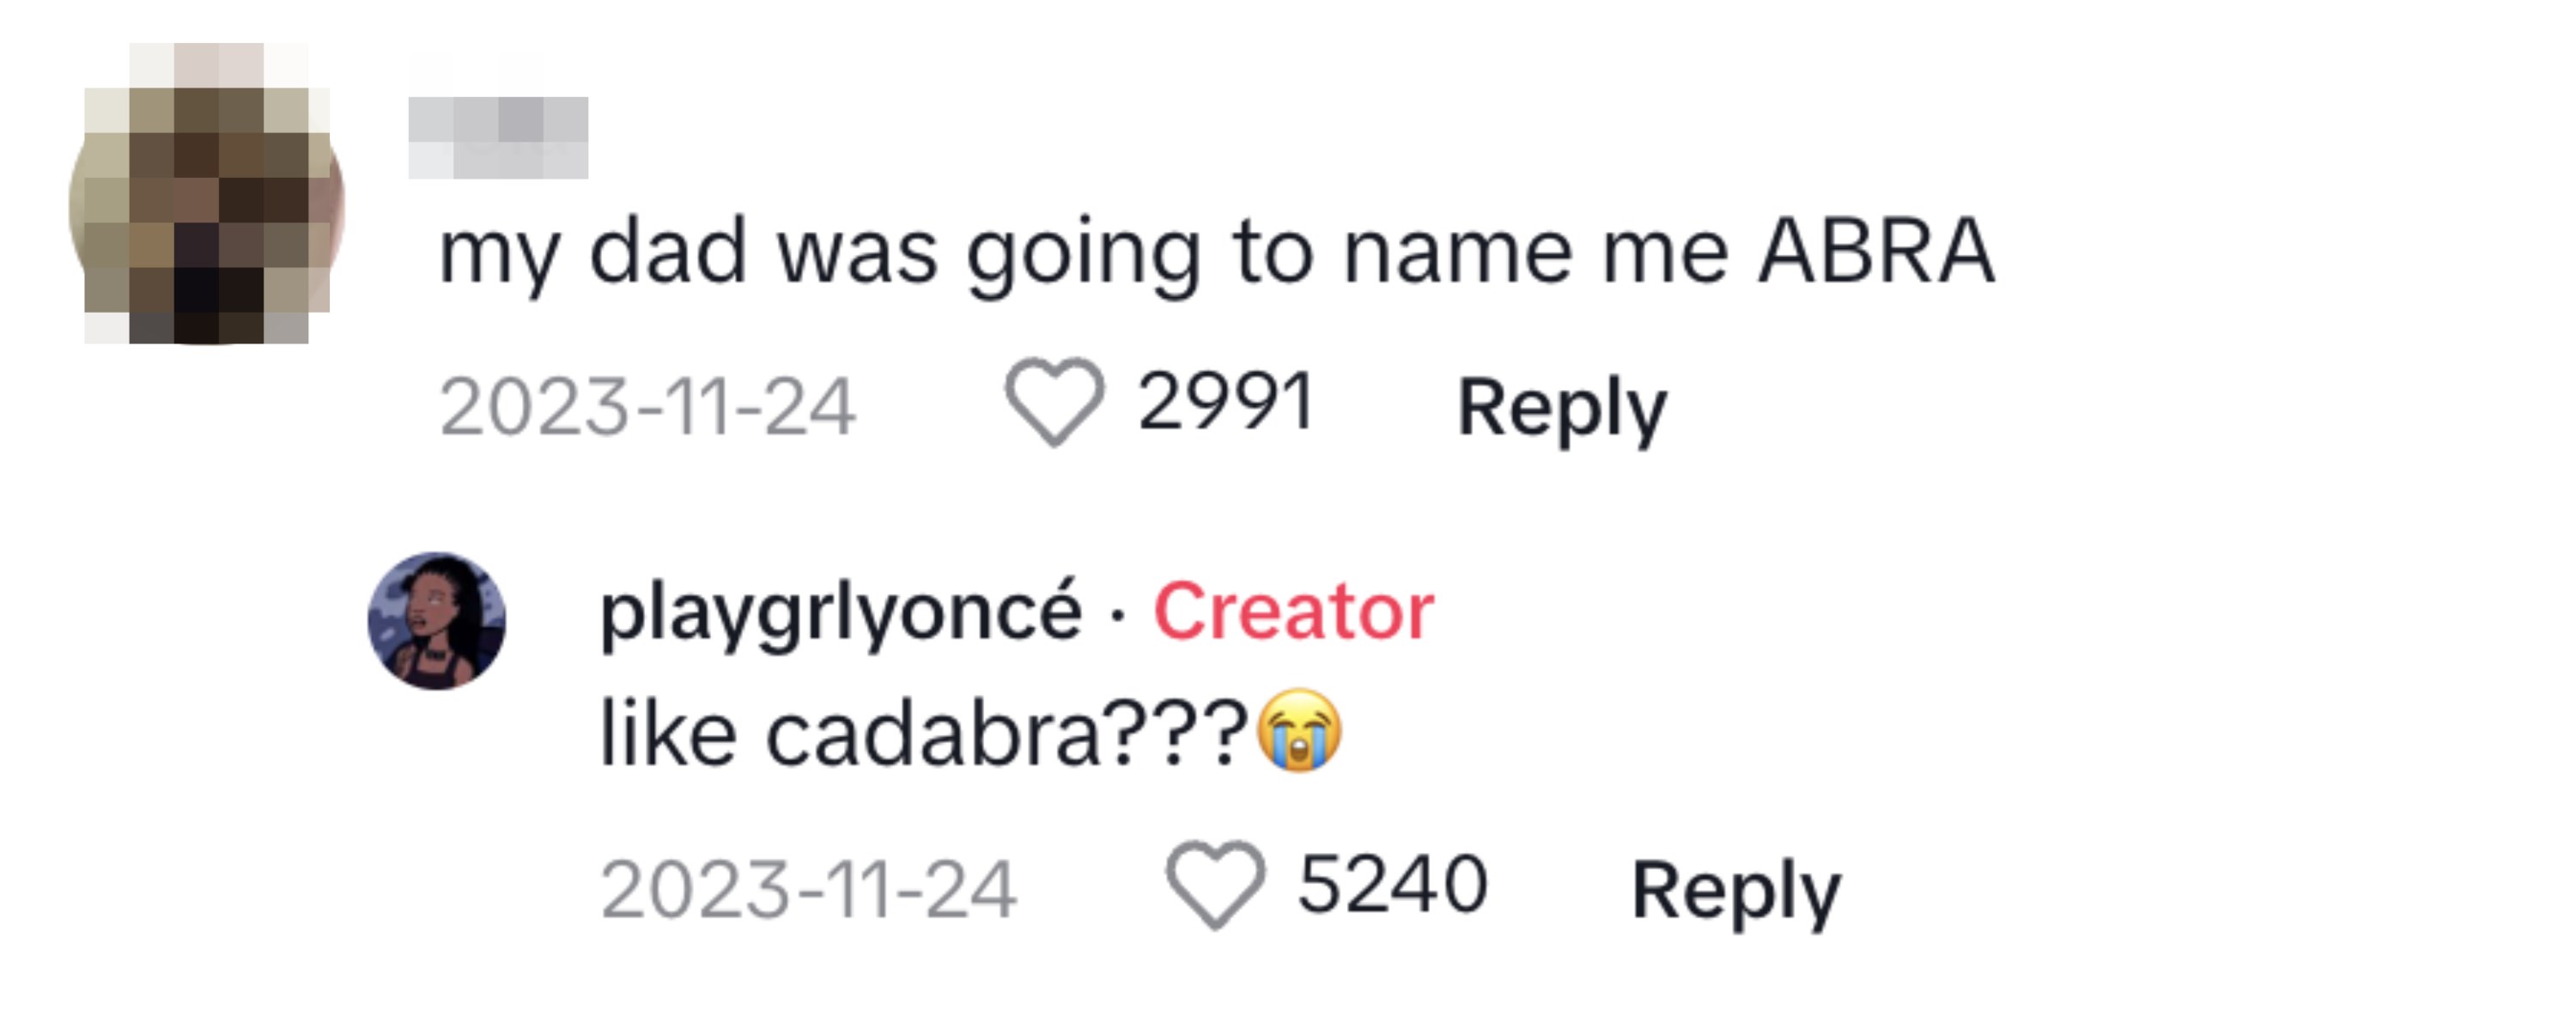 Comment: &quot;My dad was going to name me ABRA&quot;